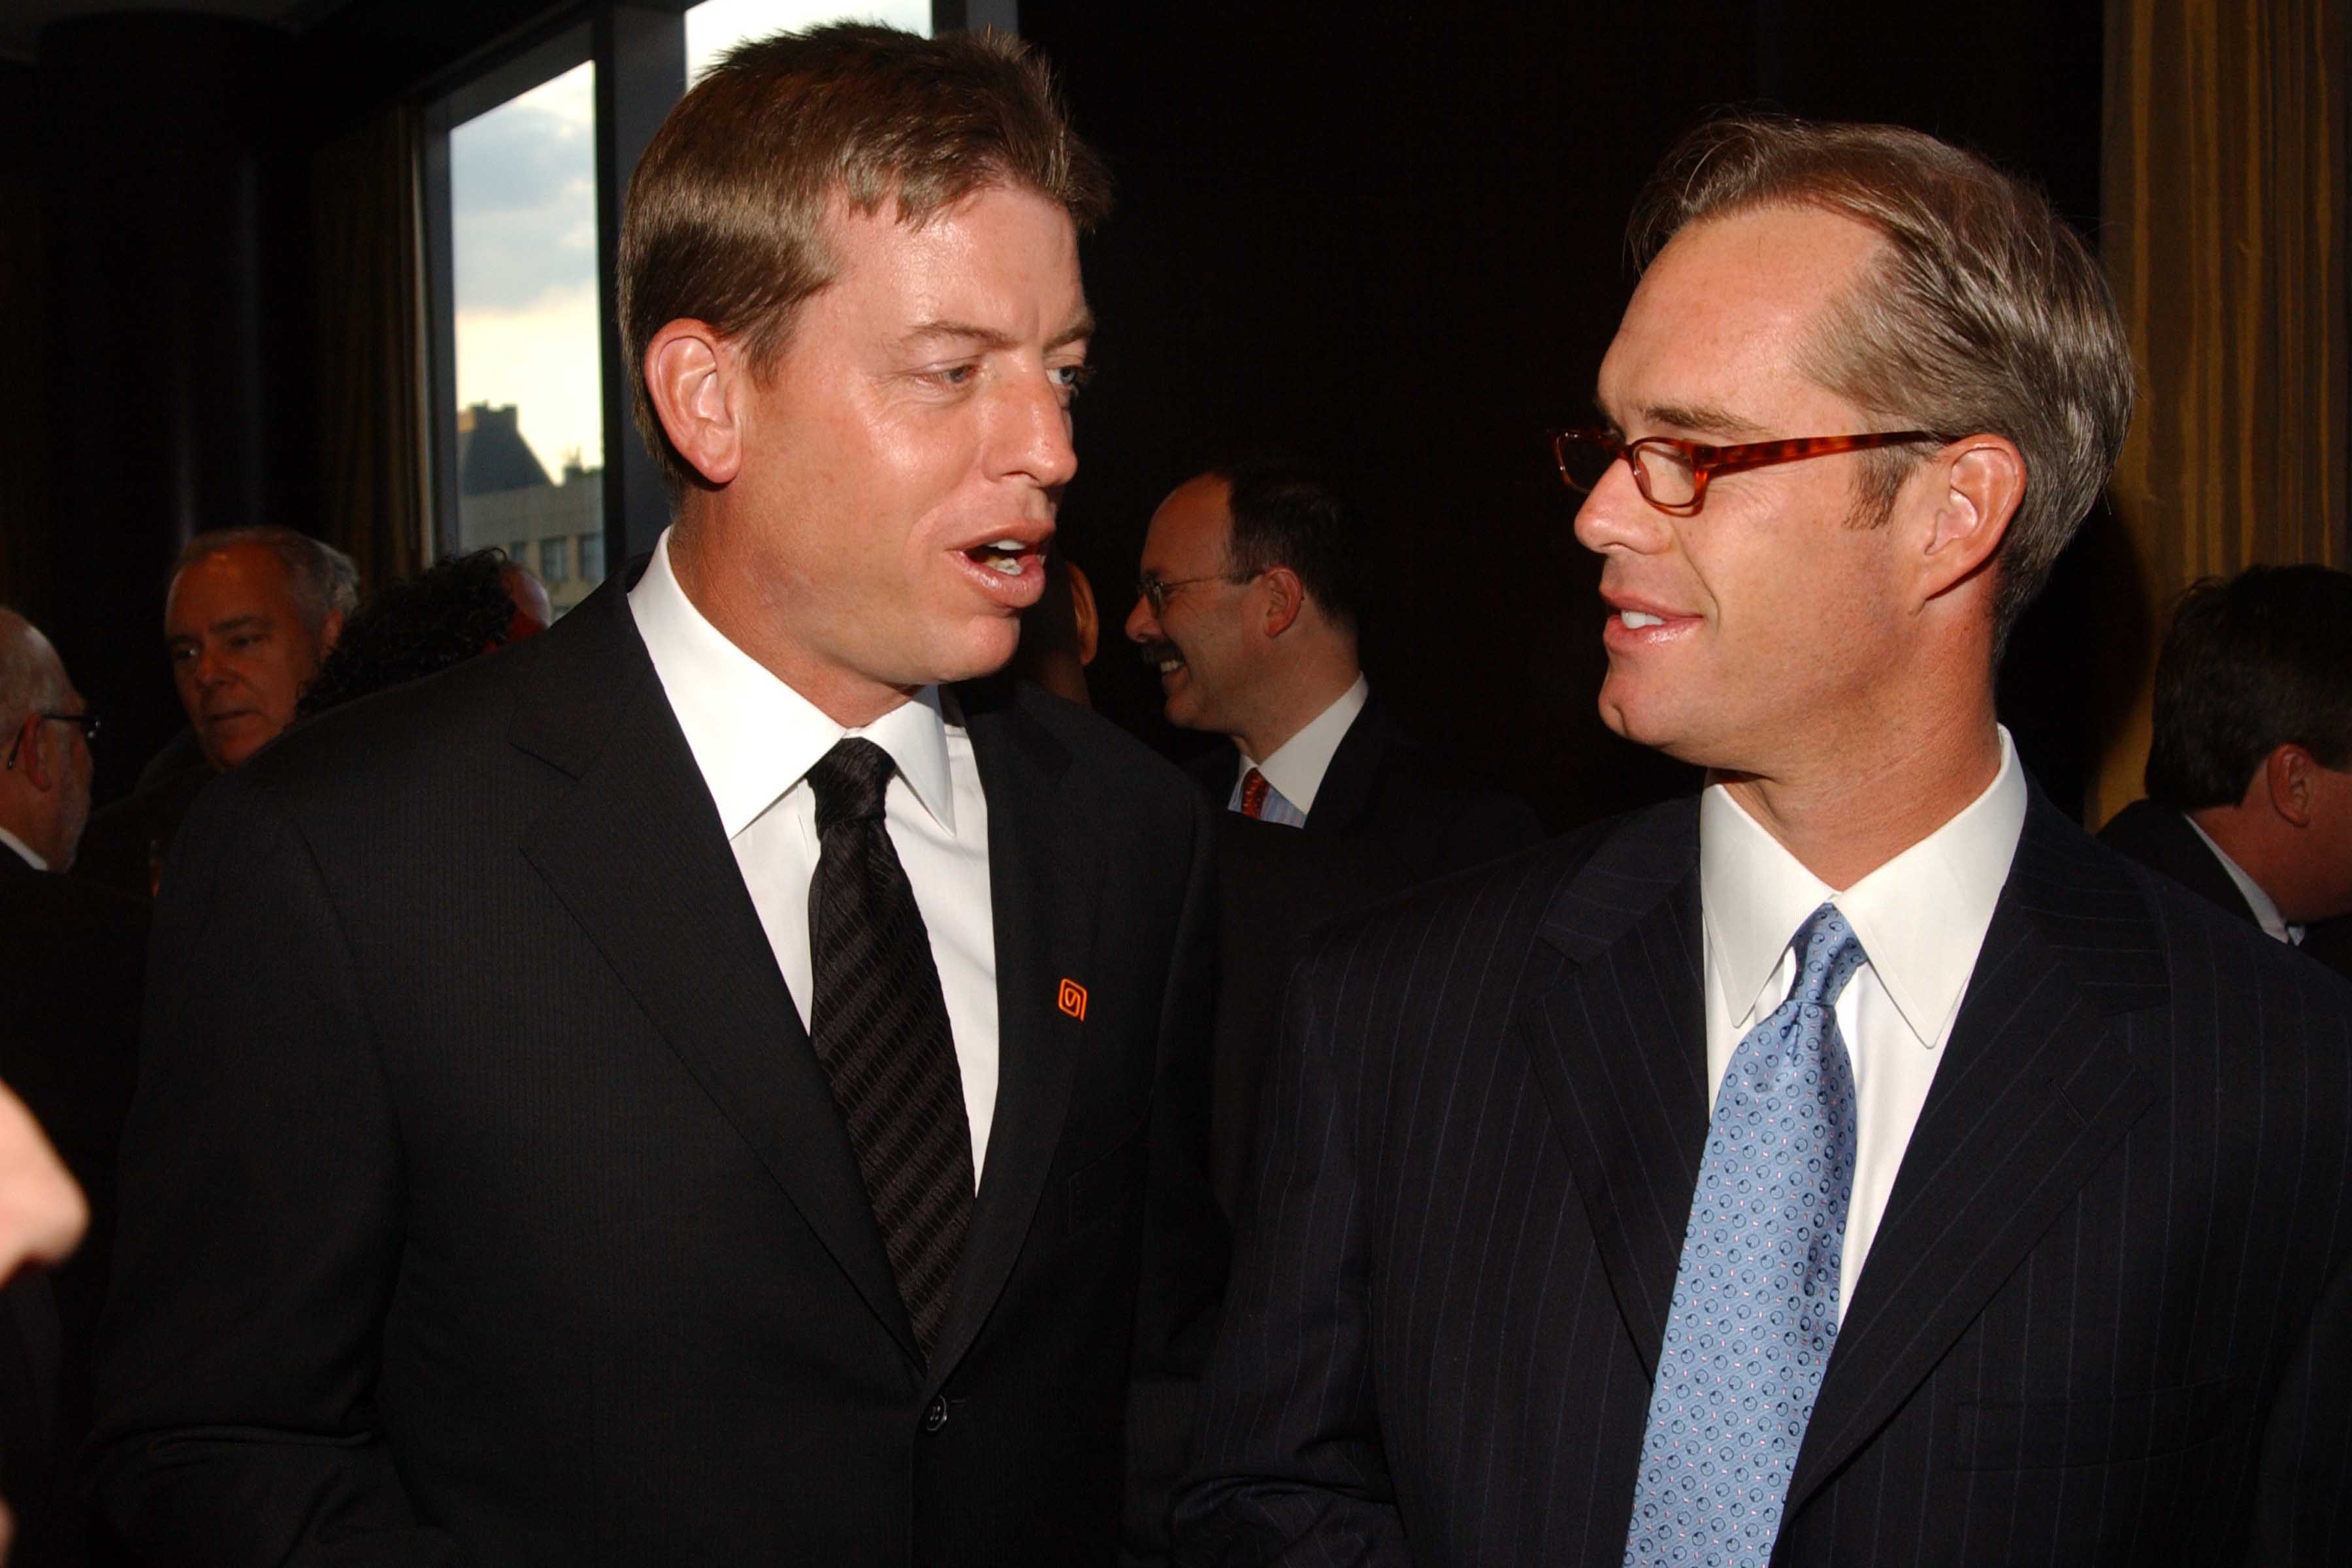 Fox announcers Joe Buck and Troy Aikman at an event in 2005.